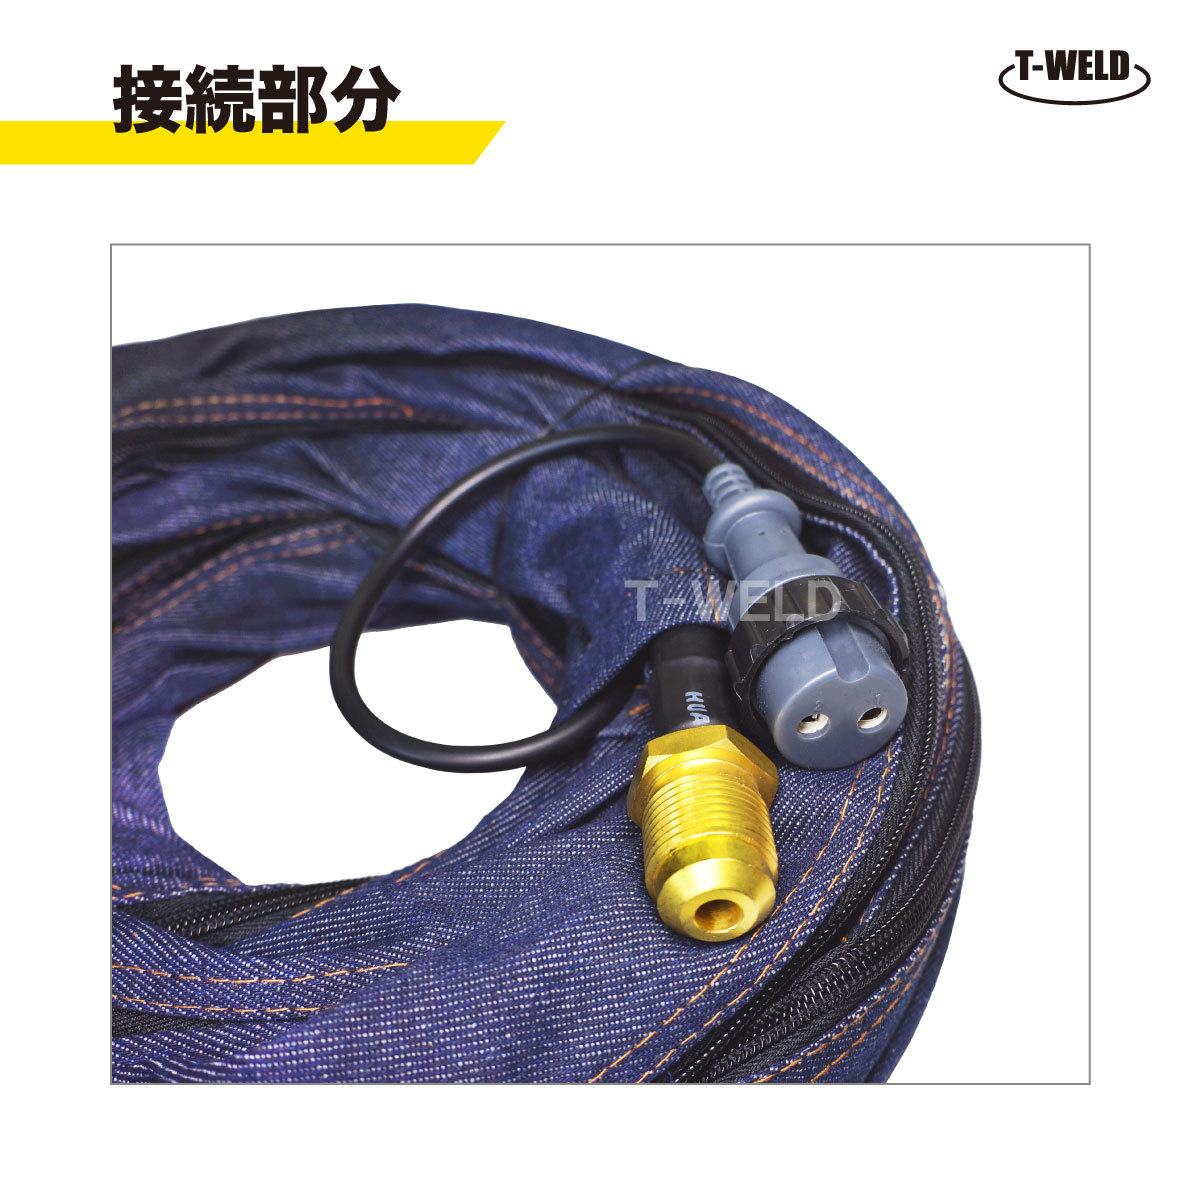 TIG torch 200A air cooling WP-26F 4m YT-20TSF2 AWF-26 conform flexible type precision high Denim cover adaptor attaching . cable flexibility UP